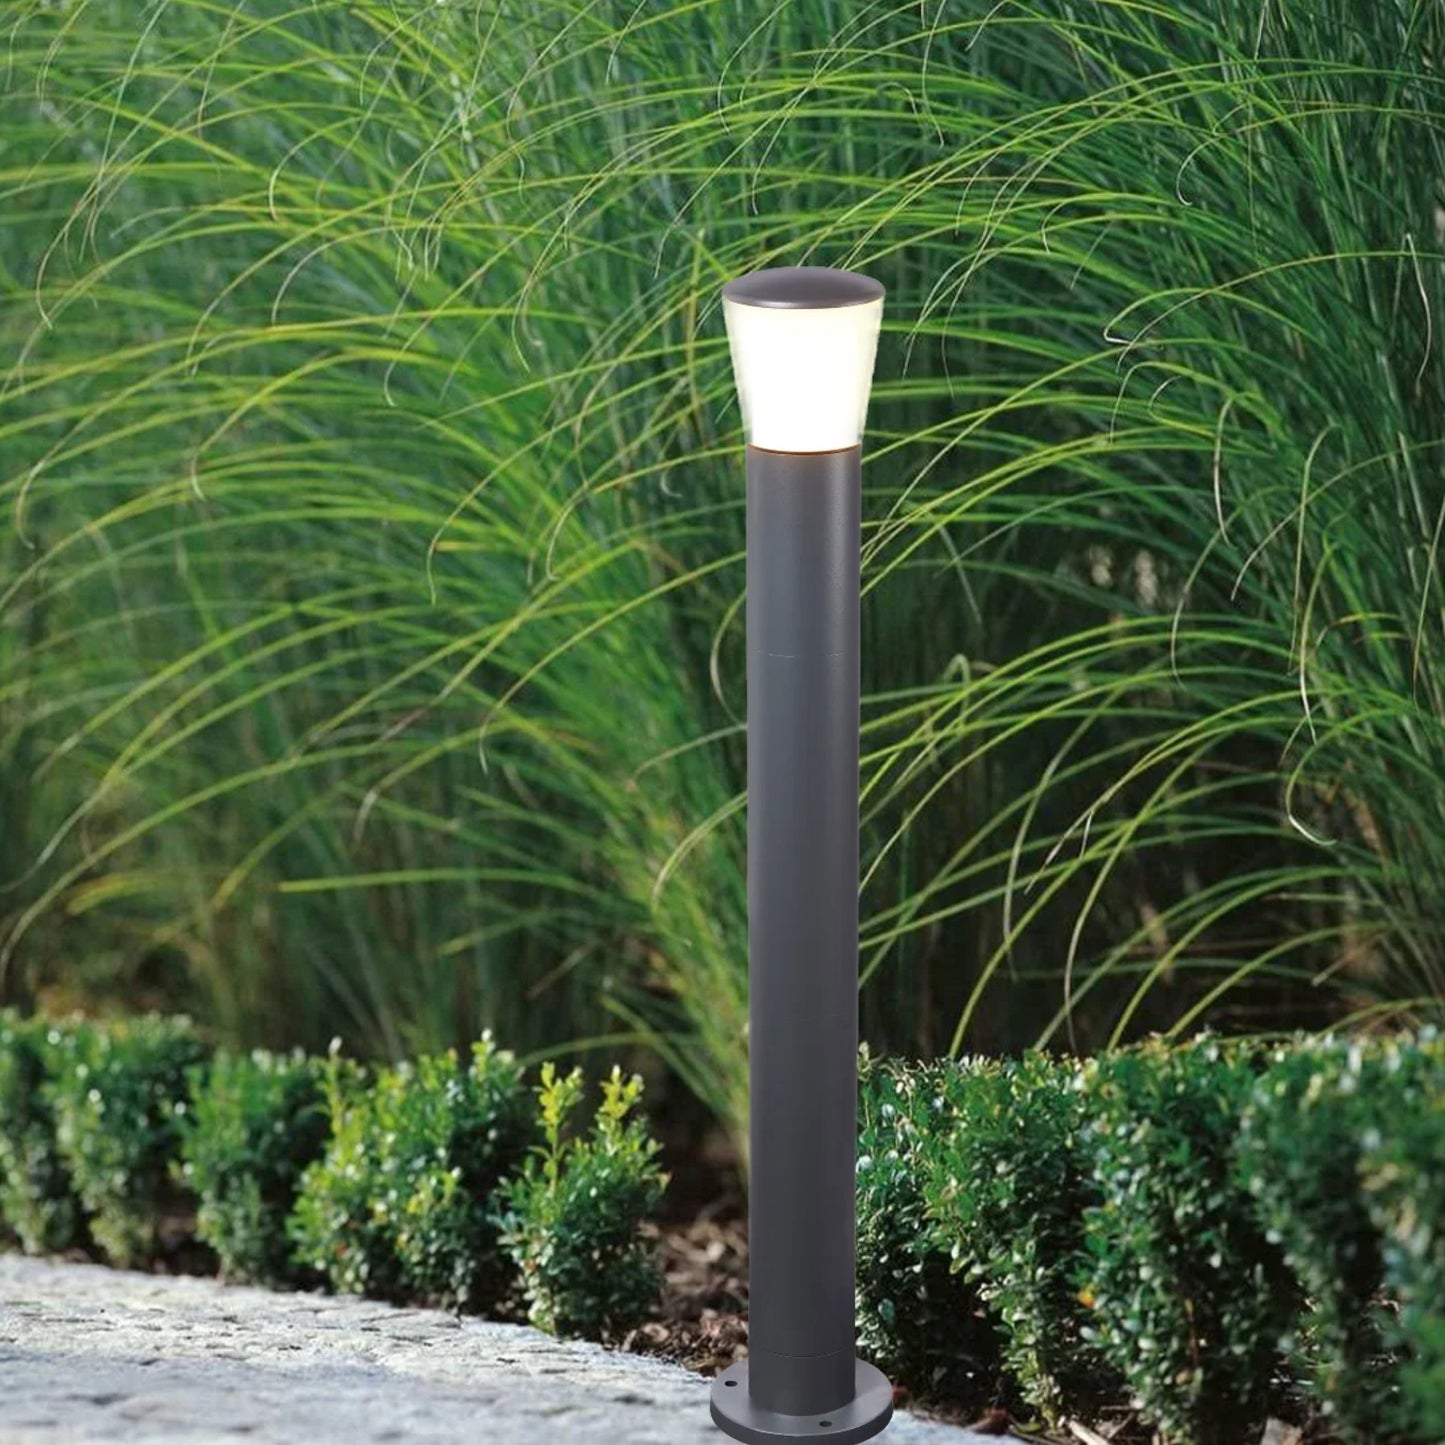 Our Otis dark grey anthracite outdoor post light would look perfect in a modern or more traditional home design. Outside post lights can provide atmospheric light in your garden, at the front door or on the terrace as well as a great security solution. It is designed for durability and longevity with its robust material producing a fully weatherproof and water resistant light fitting.